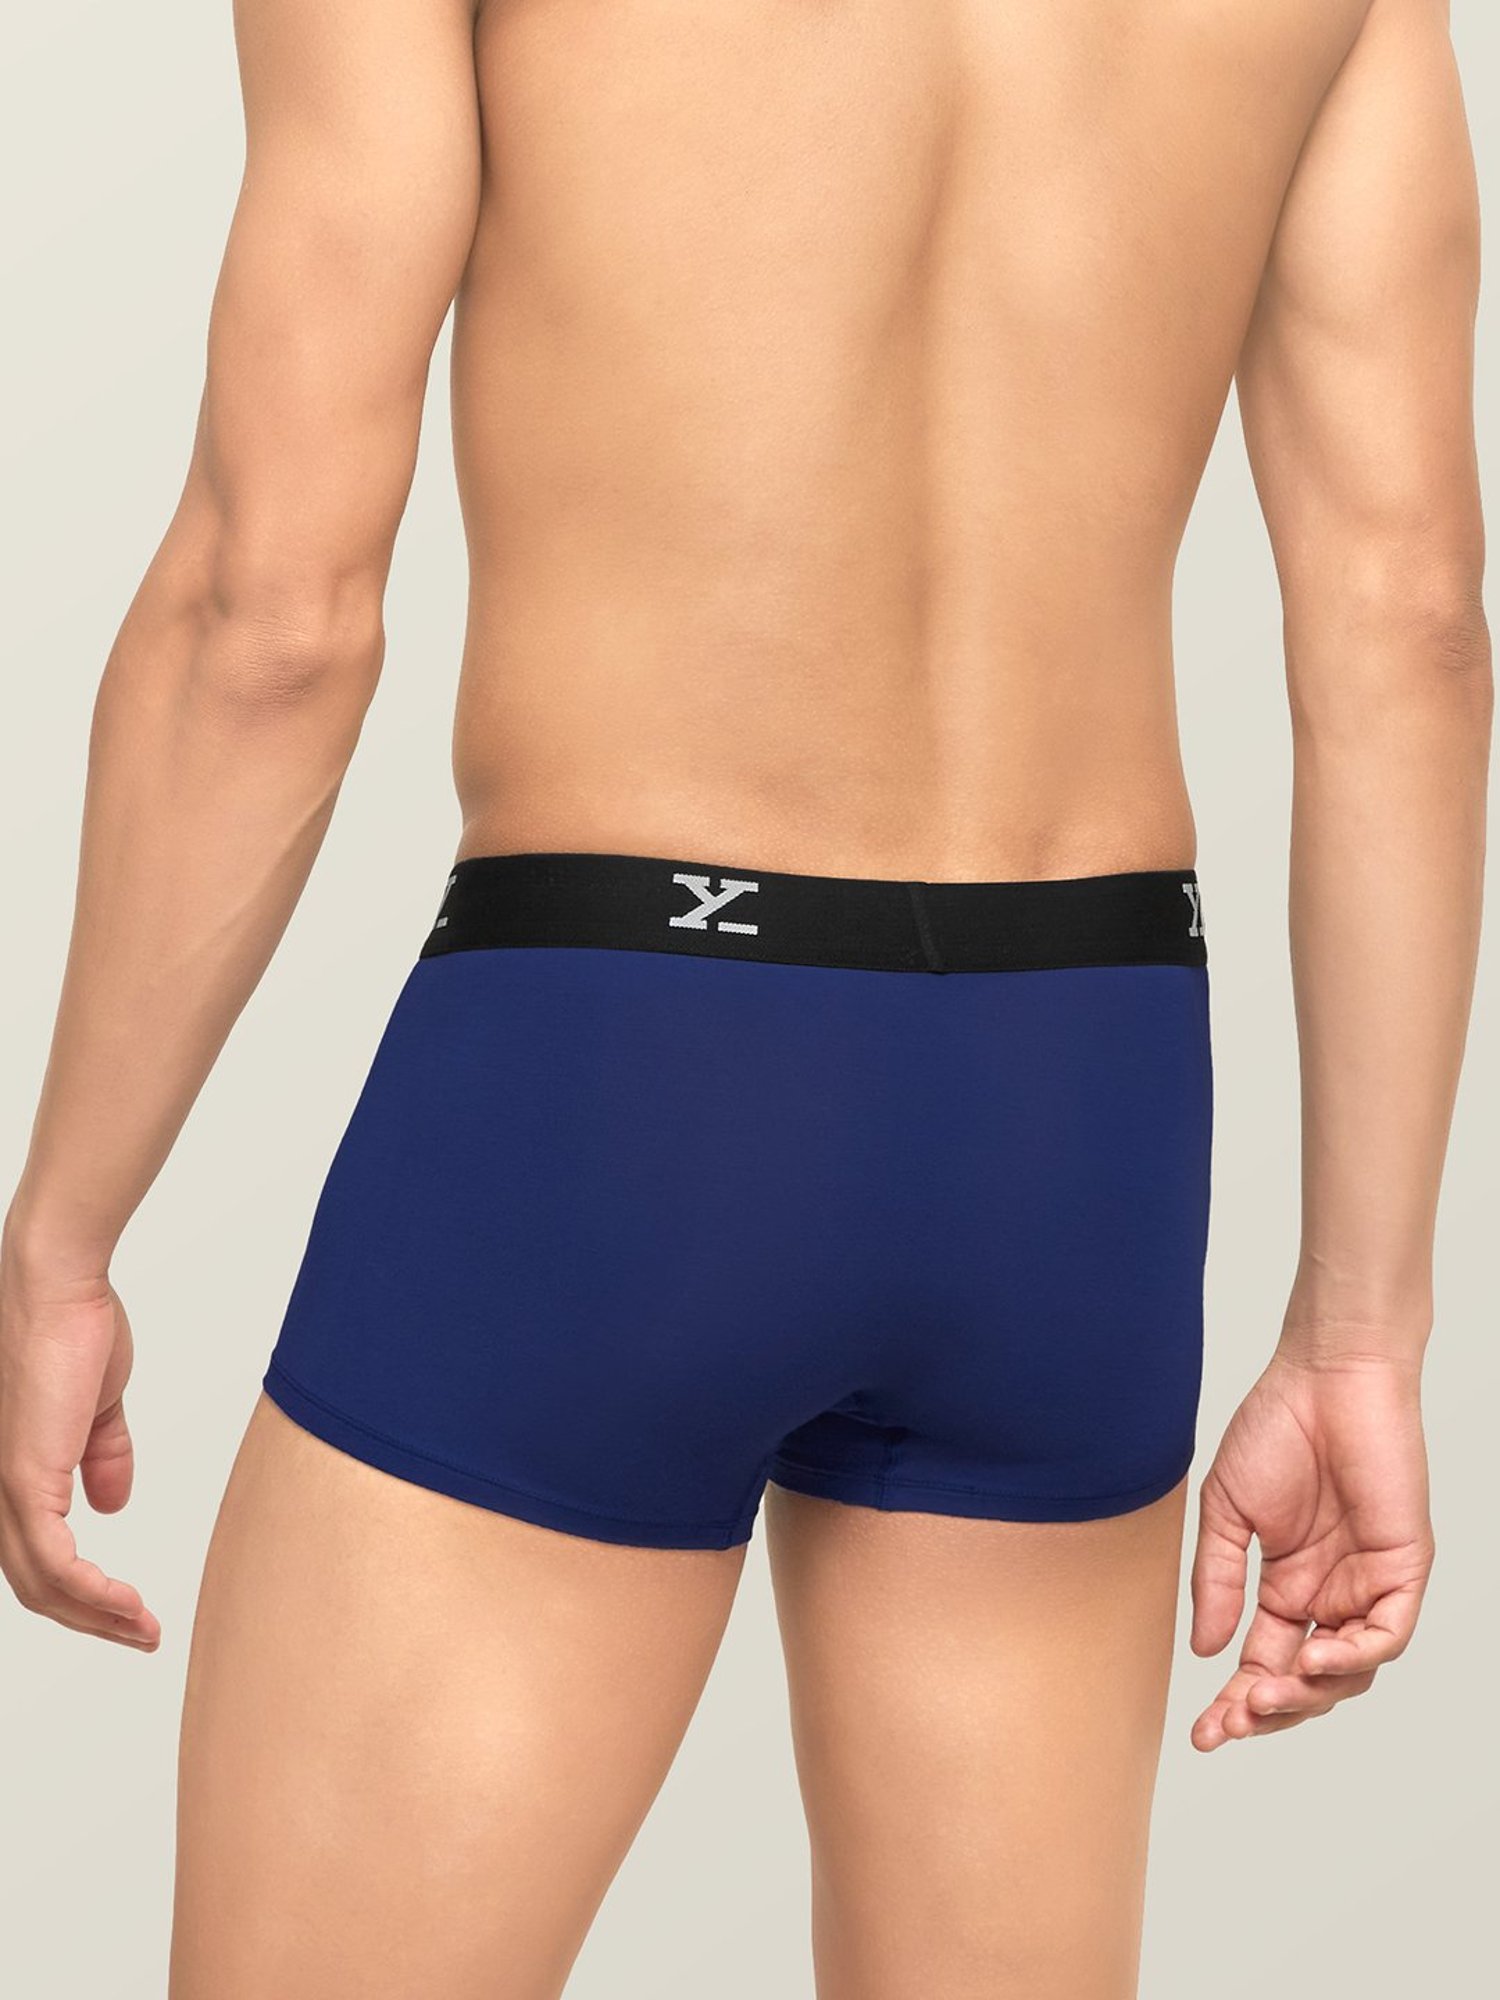 Columbia Multicolor Trunks - Pack of 3